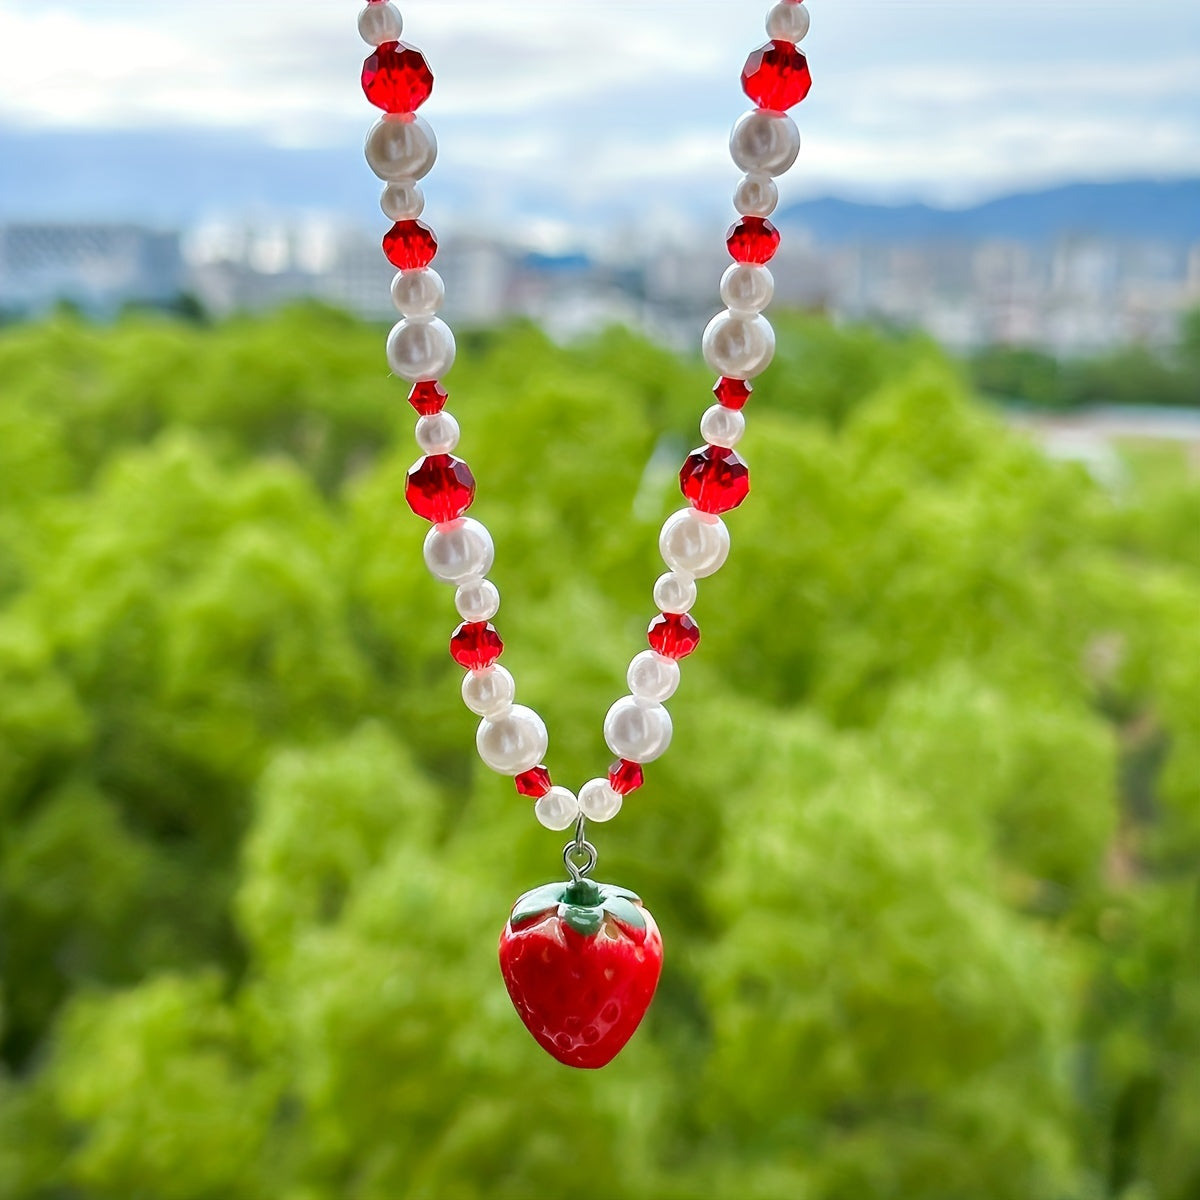 Strawberry Pendant Necklace With Faux Pearl Crystal Beads, Cute Fruit Design Gift Accessories Ornament